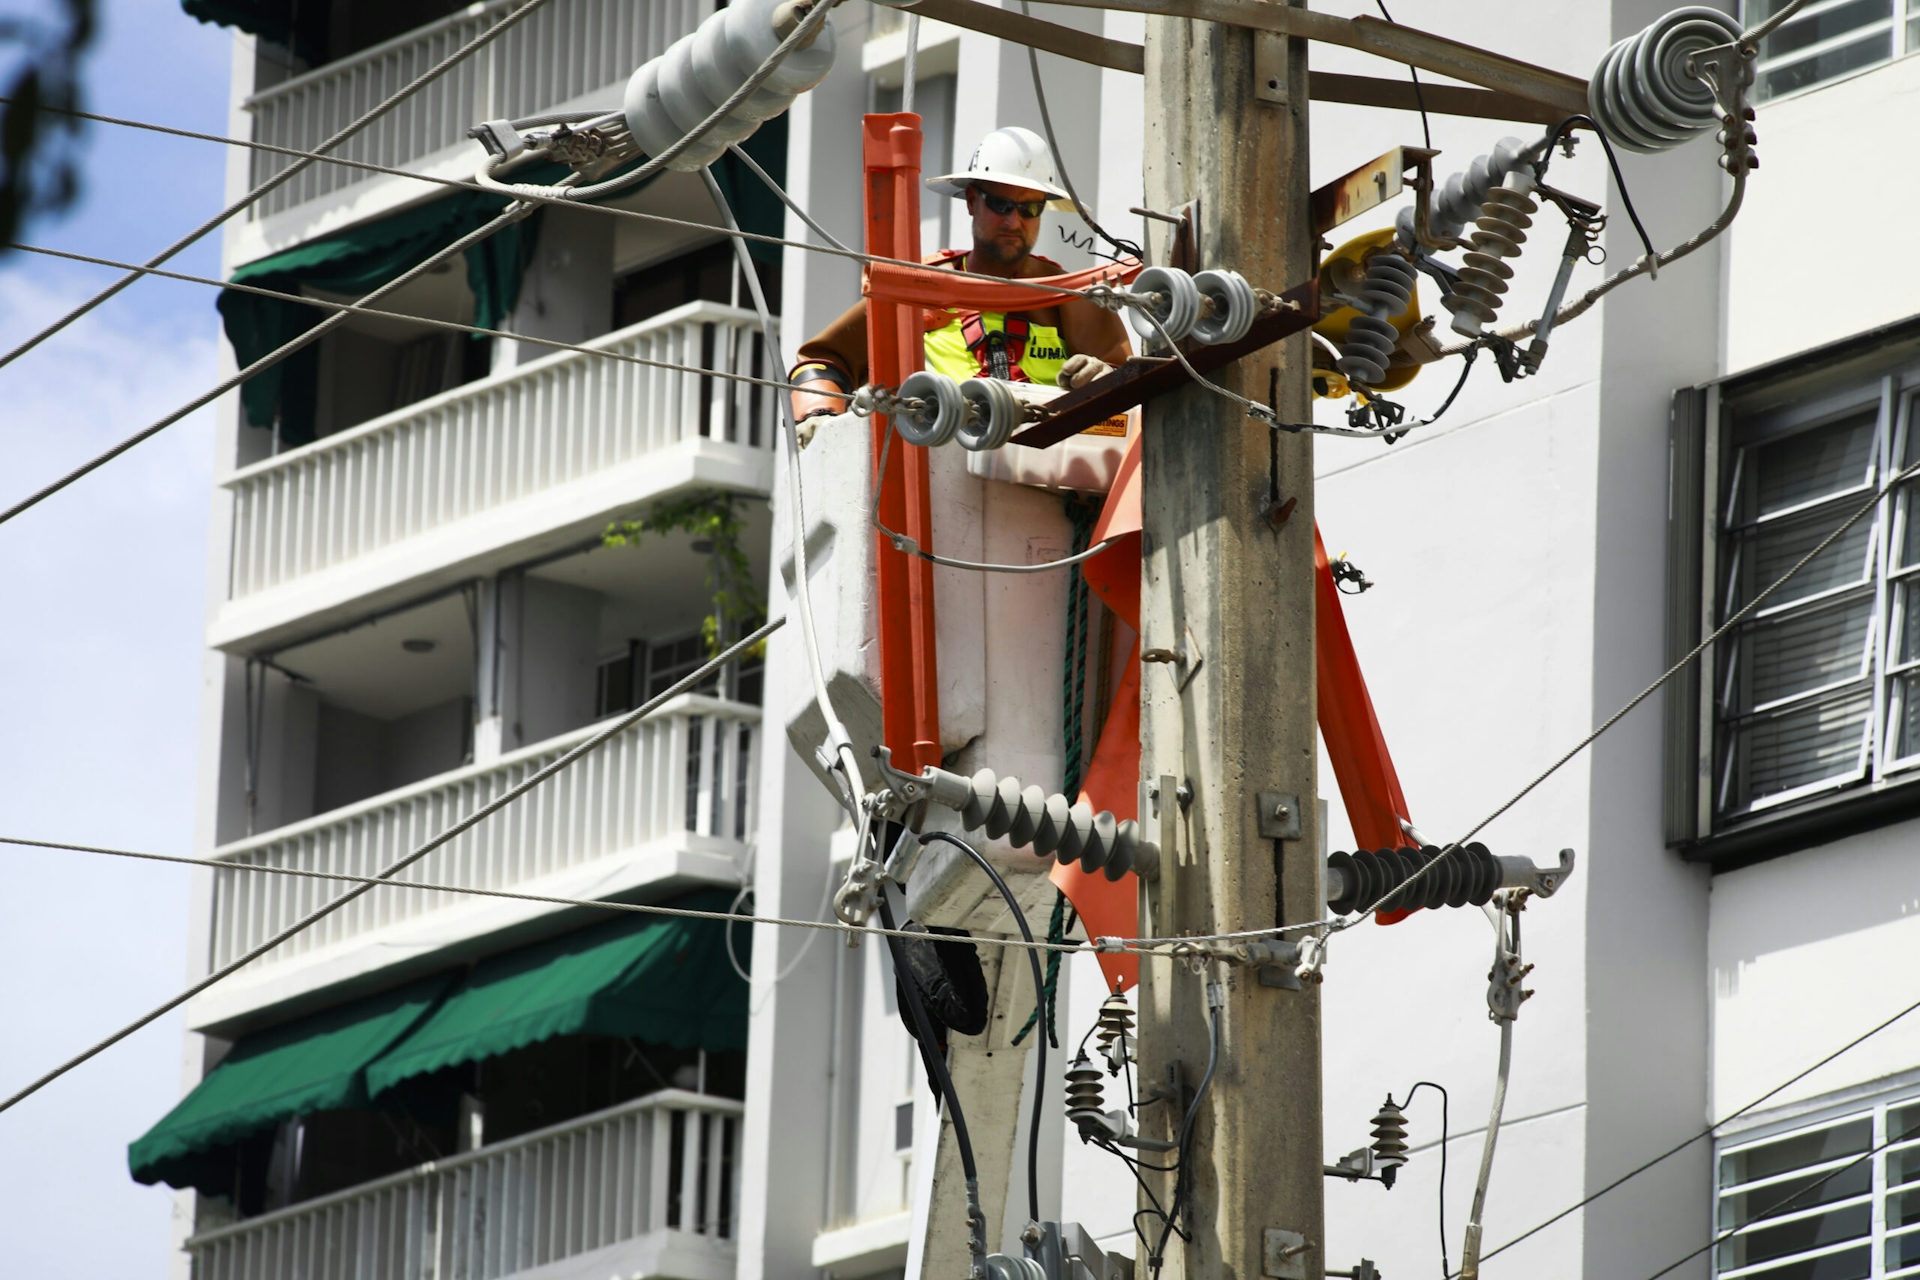 Photograph of utility crews completing repairs in Puerto Rico in the aftermath of Hurricane Fiona